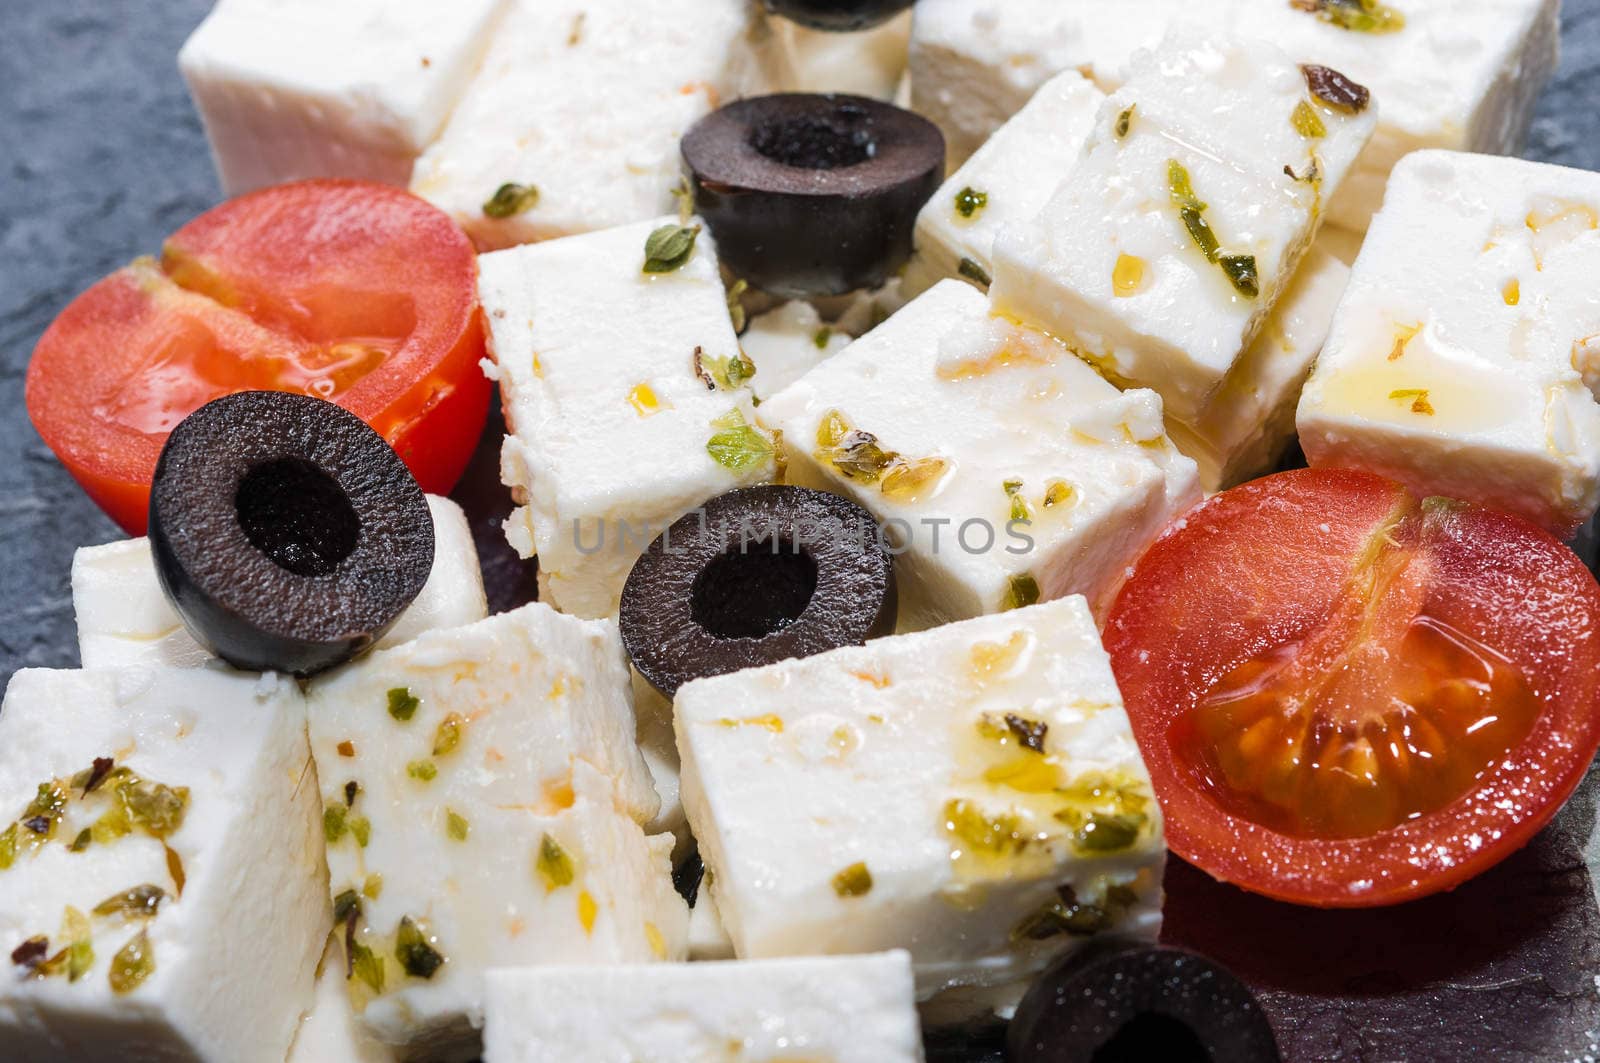 Feta cheese salad with black olives and cherry tomatoes